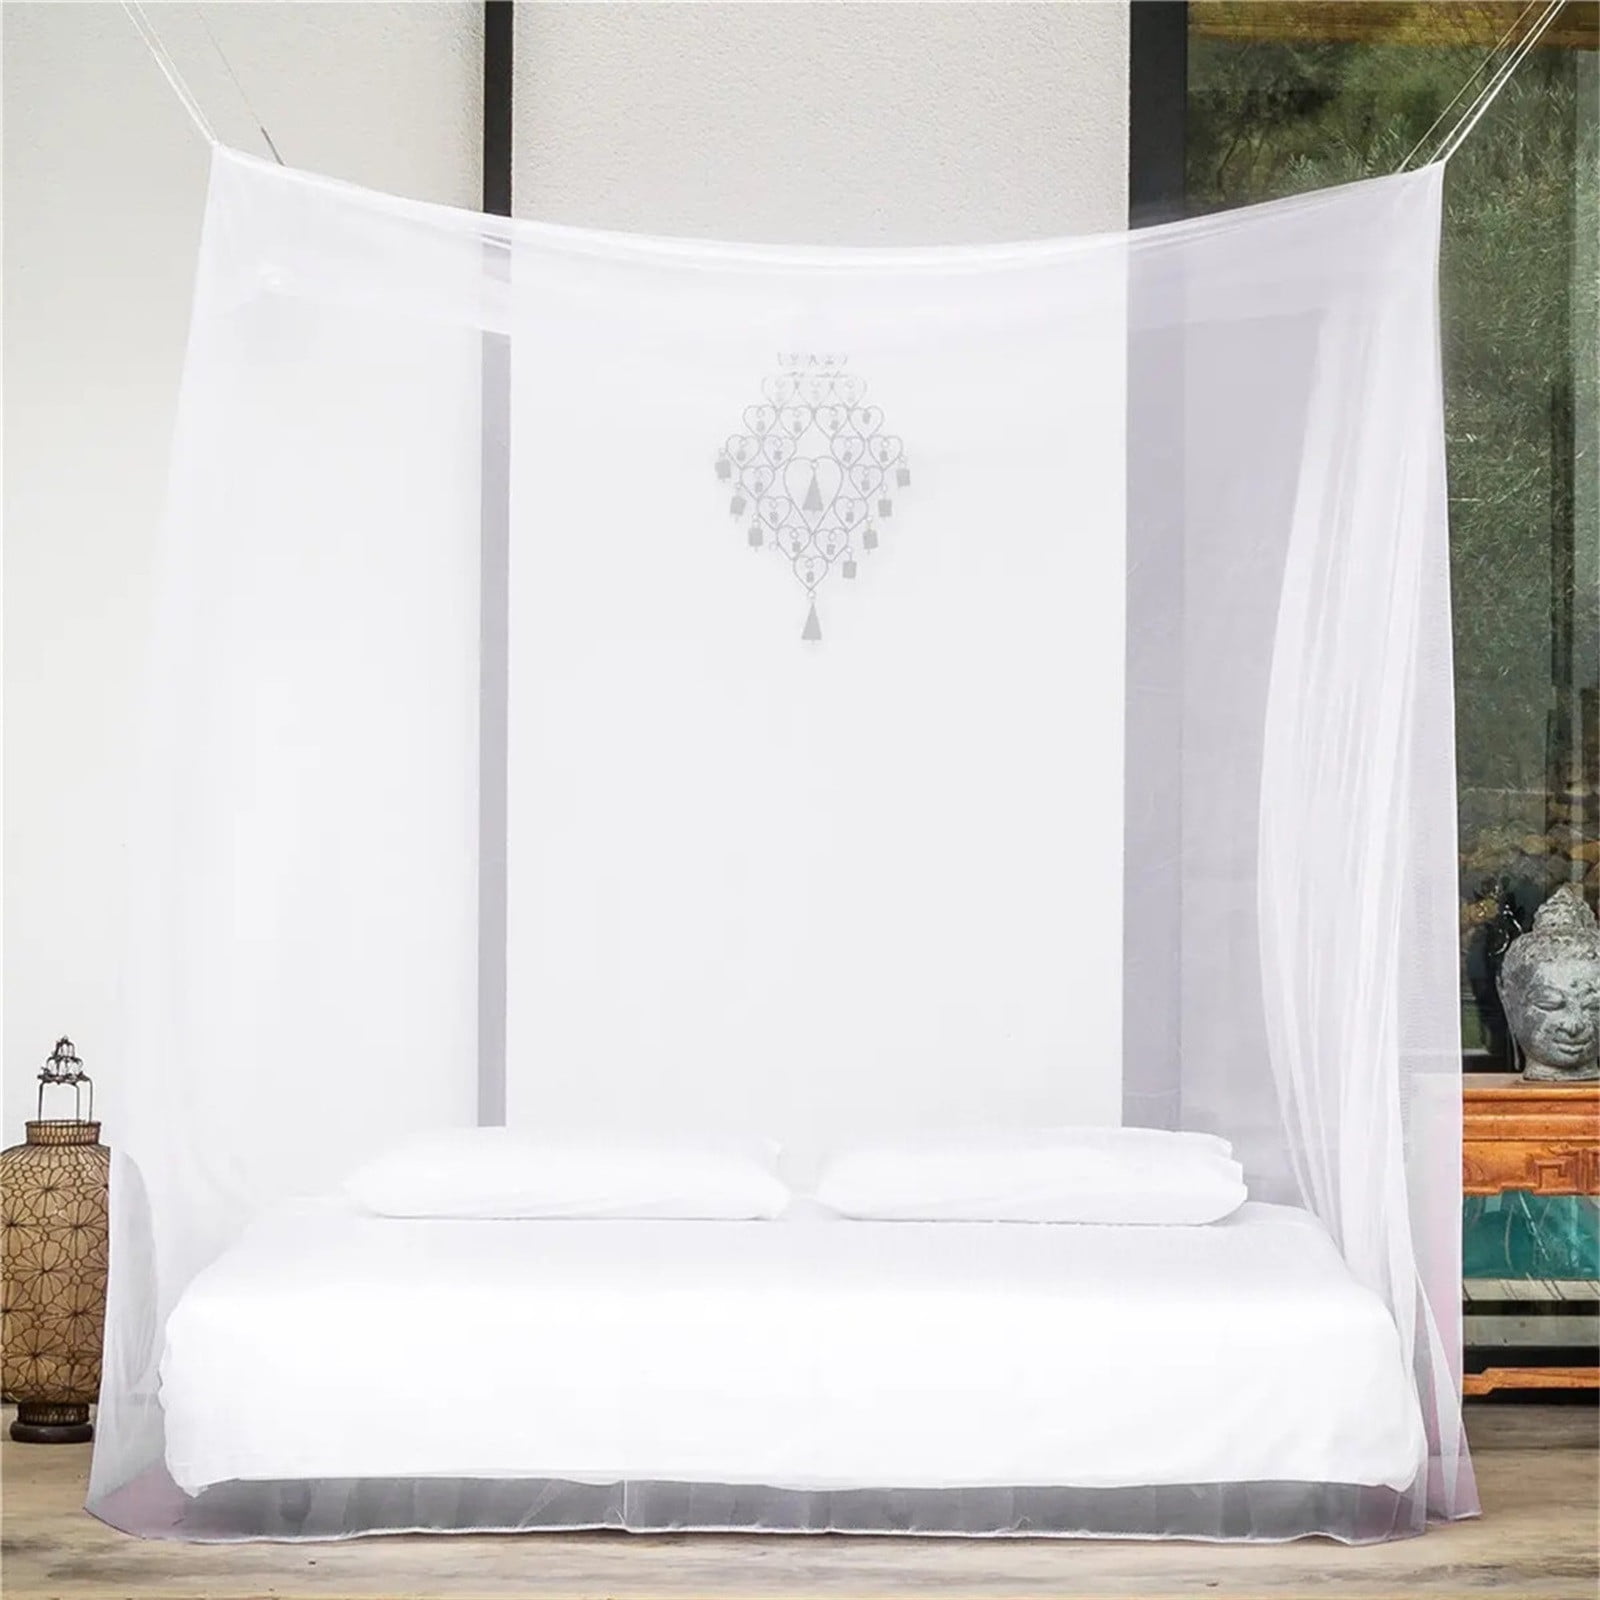 Mosquito net for large beds and outdoor use 3 x 3 metres GIANT